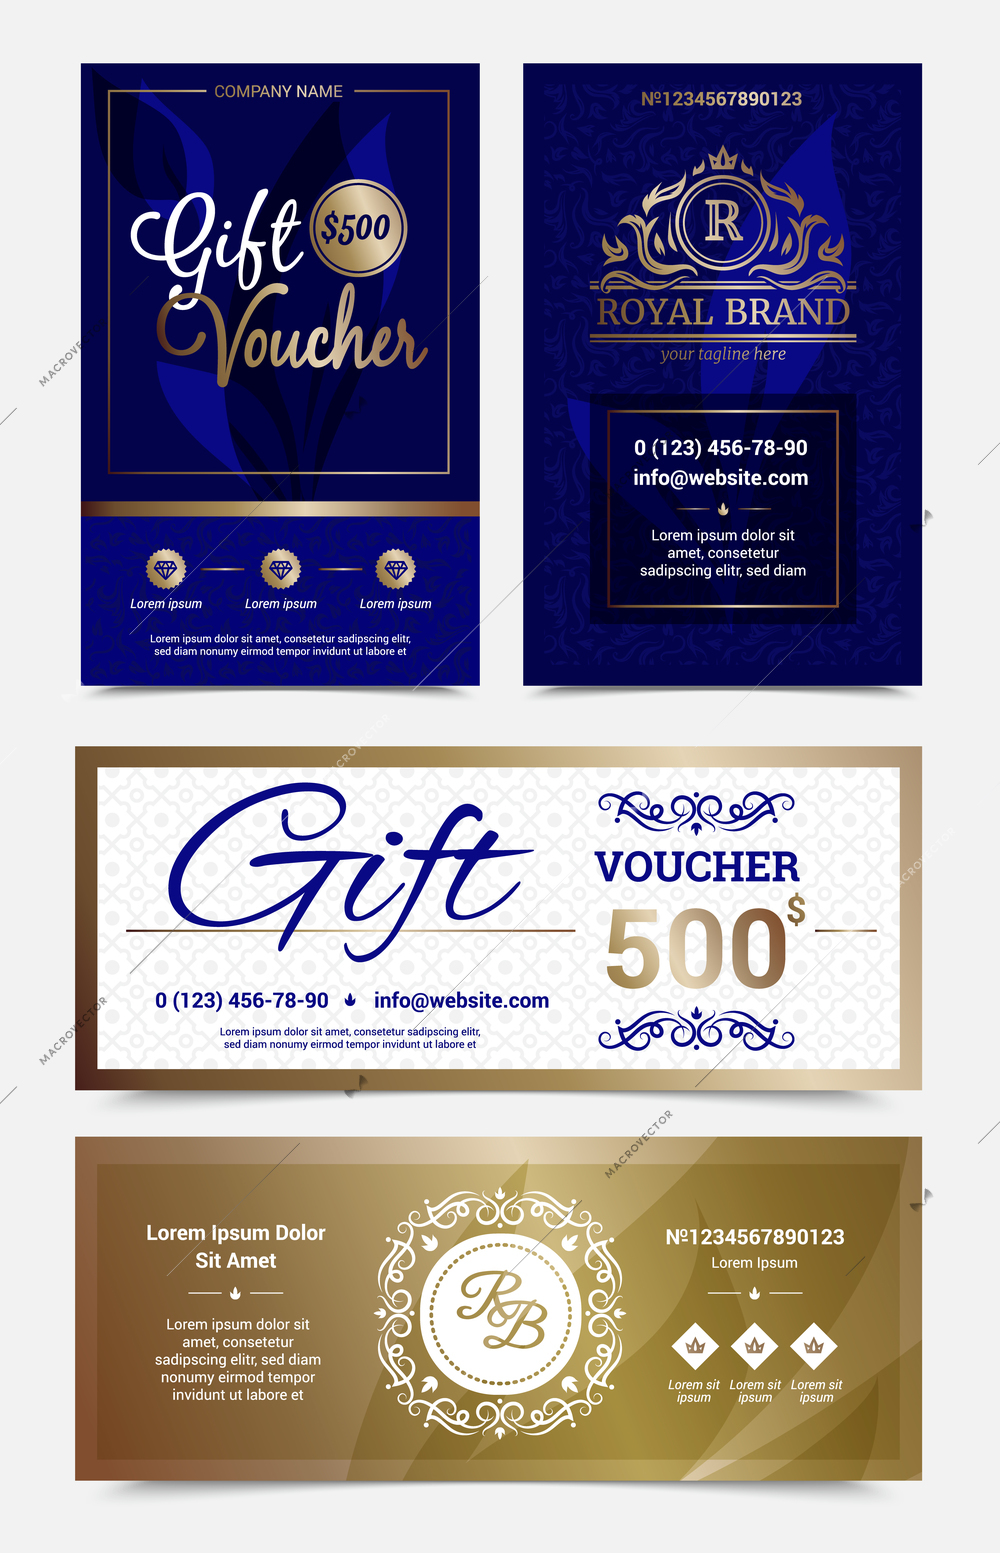 Set of gift voucher design in golden blue colors with monograms and ornate decorations isolated vector illustration